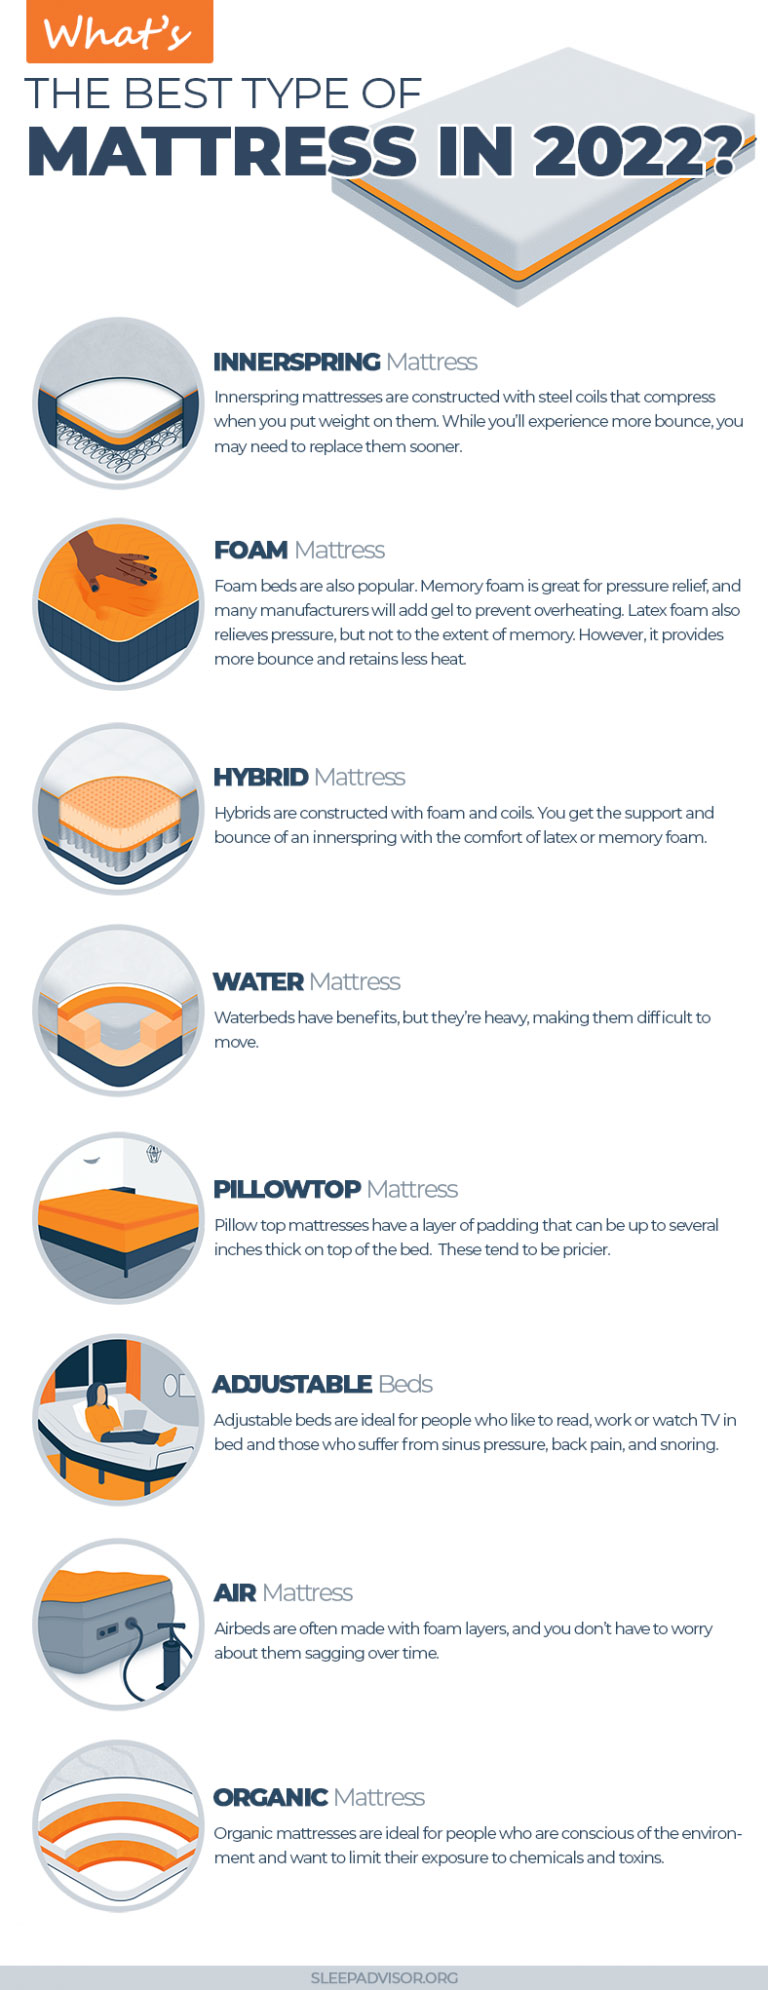 Infographic Whats The Best Type of Mattress in 2023